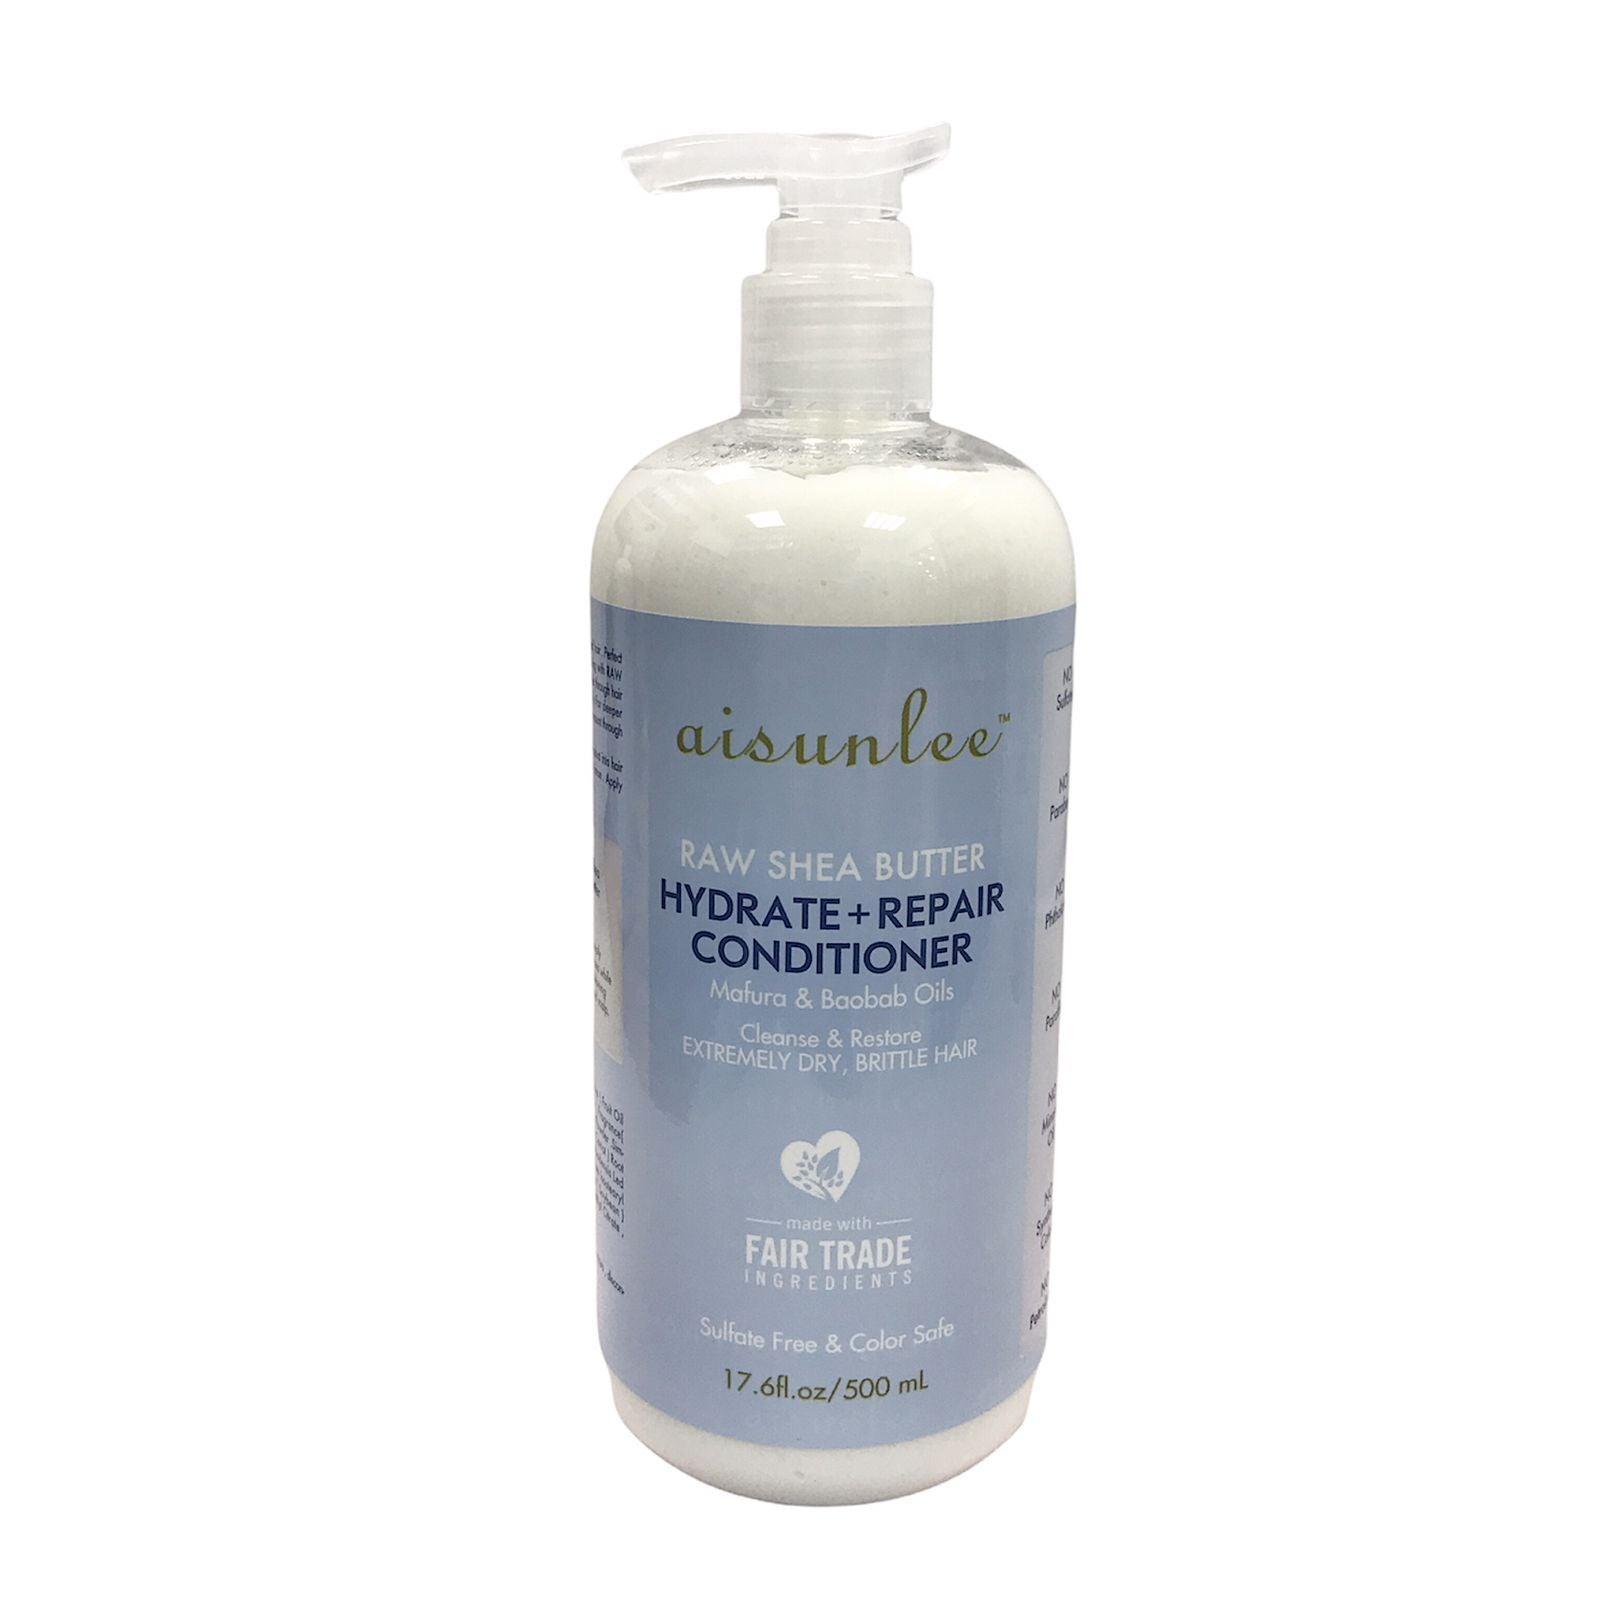 Aisunlee Raw Shea Butter Hydrate & Repair Conditioner 500ml